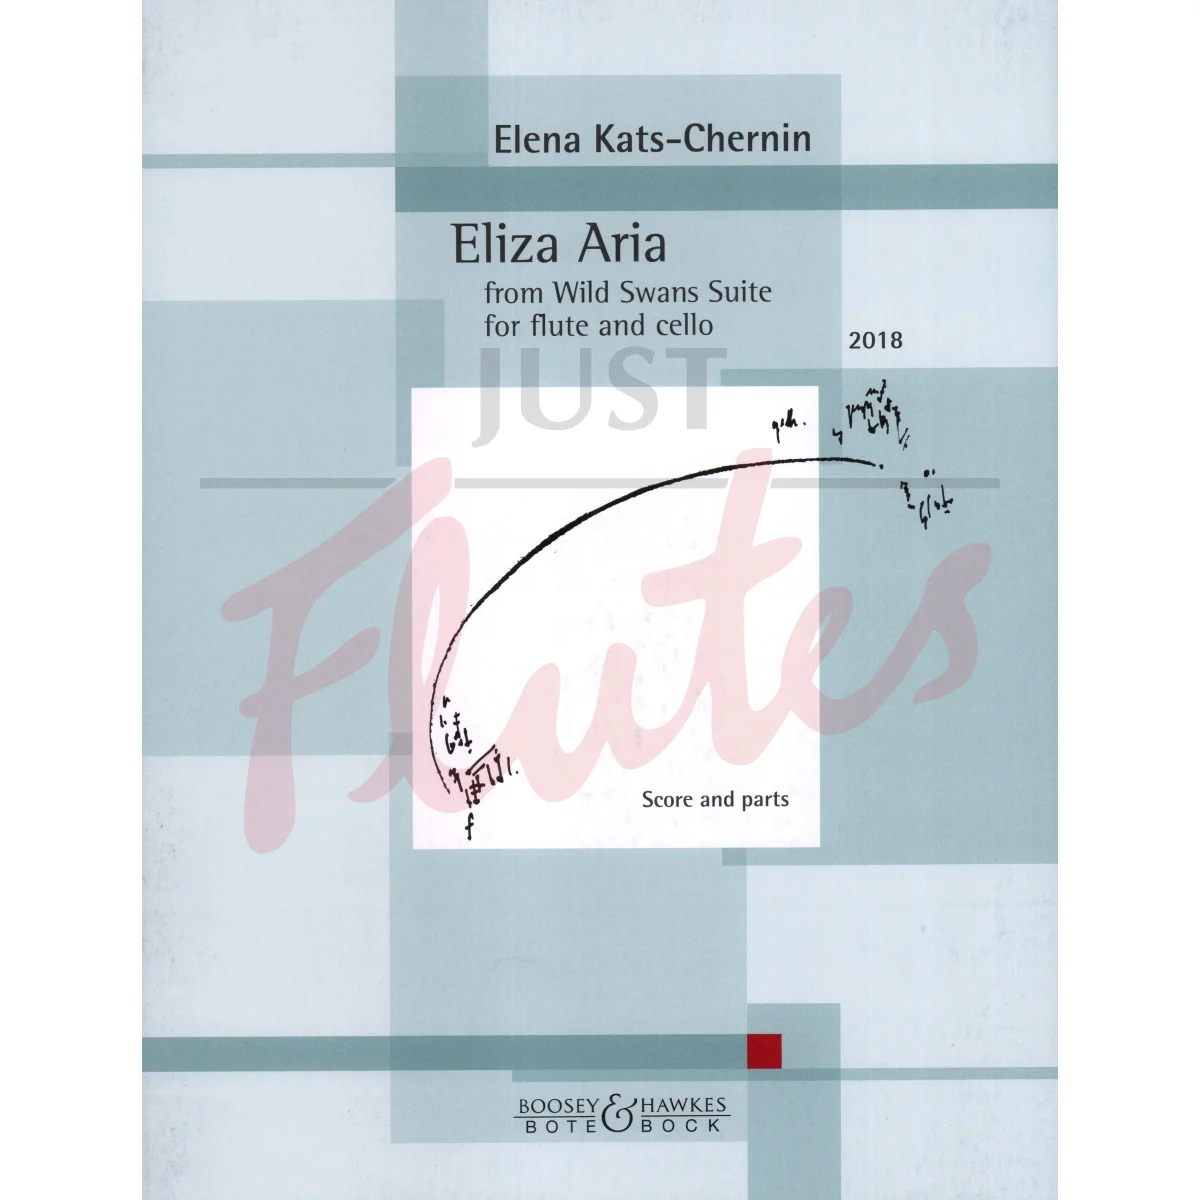 Eliza Aria from Wild Swans Suite for Flute and Cello